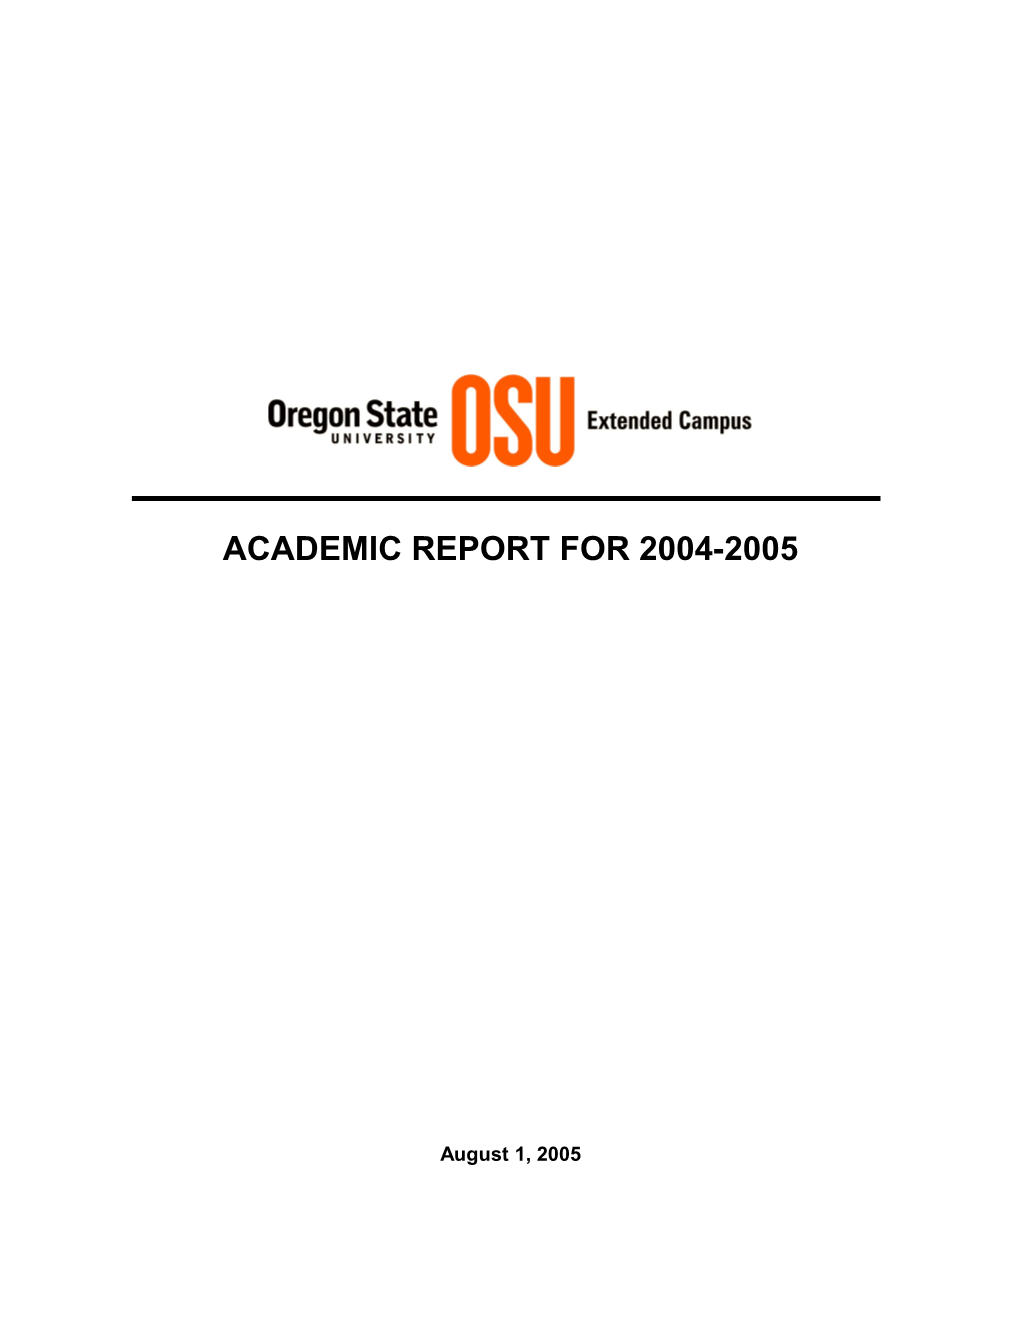 OSU Extended Campus Academic Report for 2004-2205